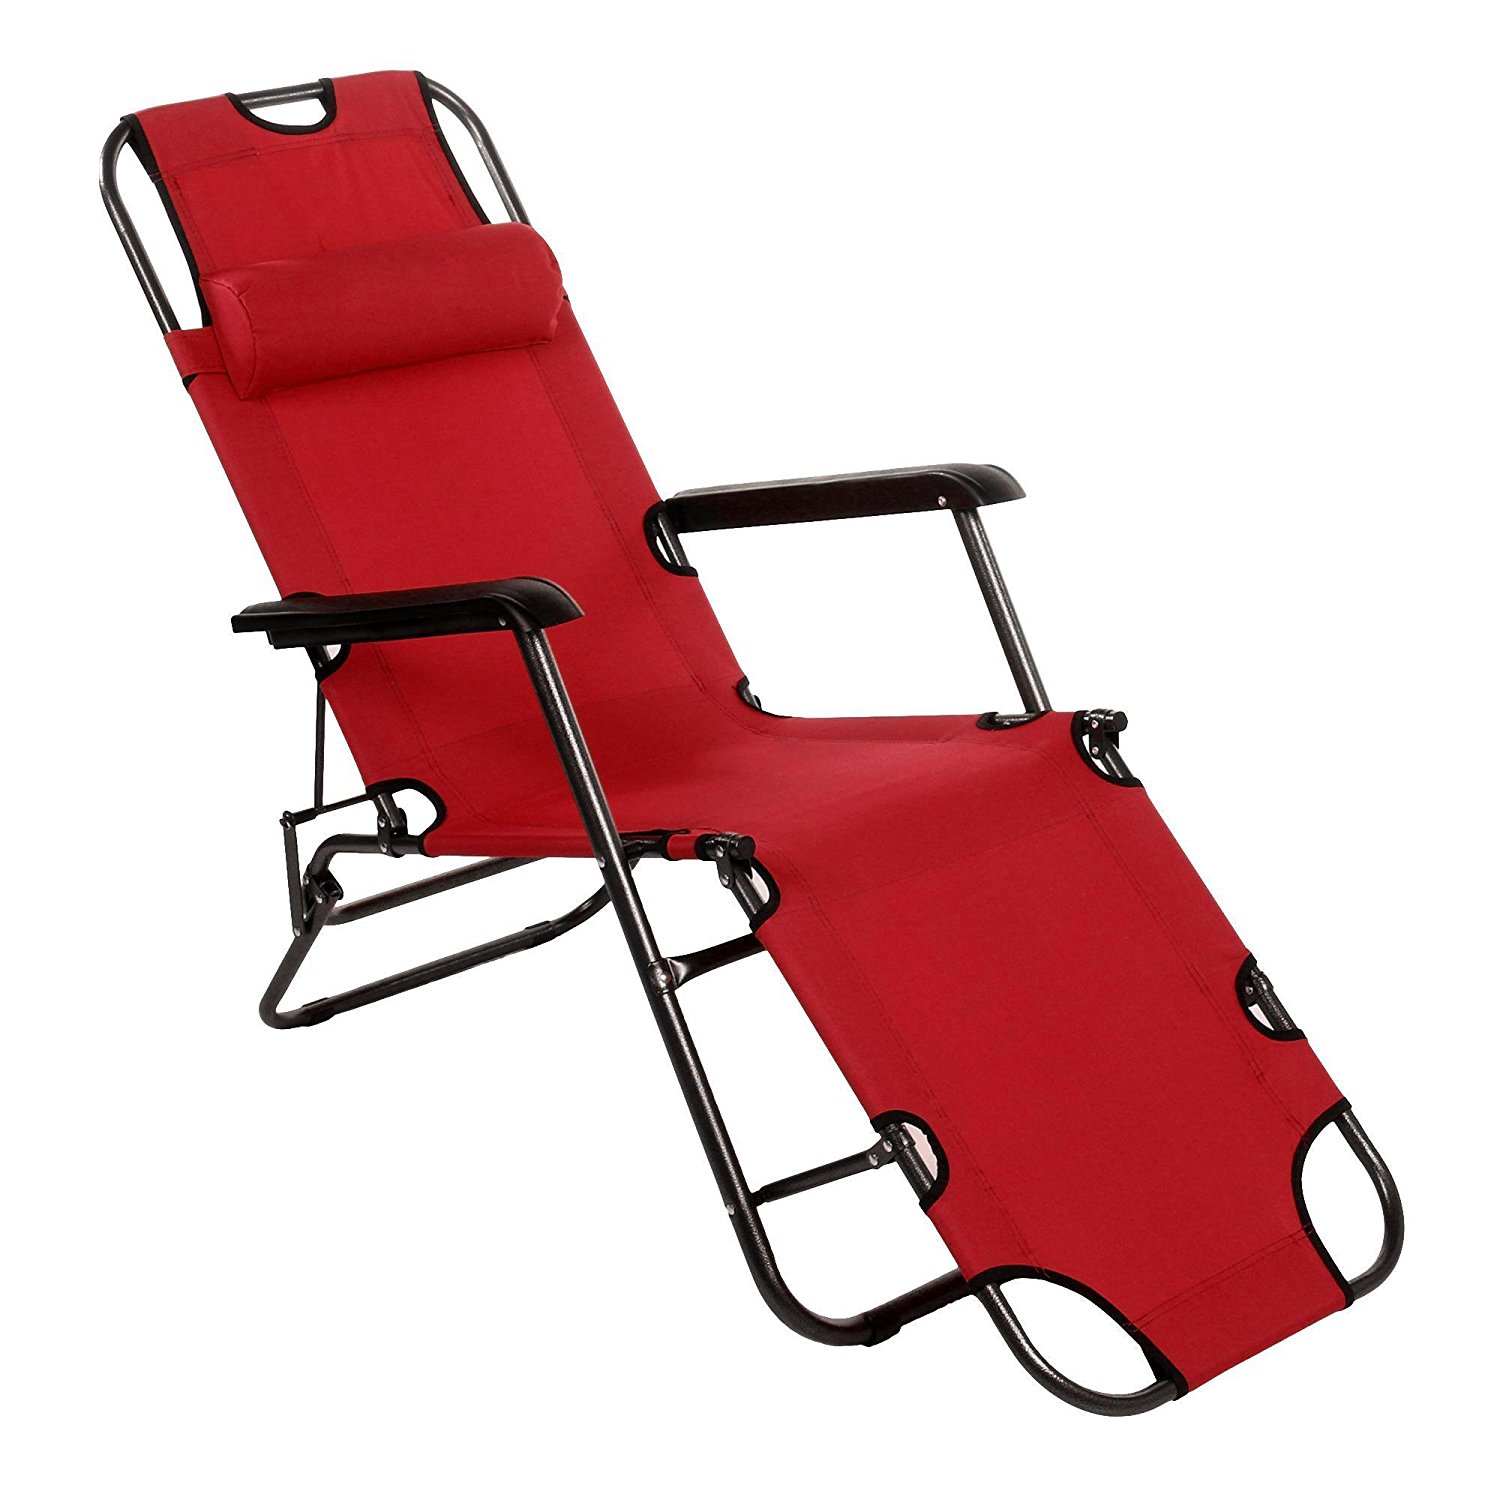 Amazon - Buy Story@Home Folding Portable Lounge Chair, Red